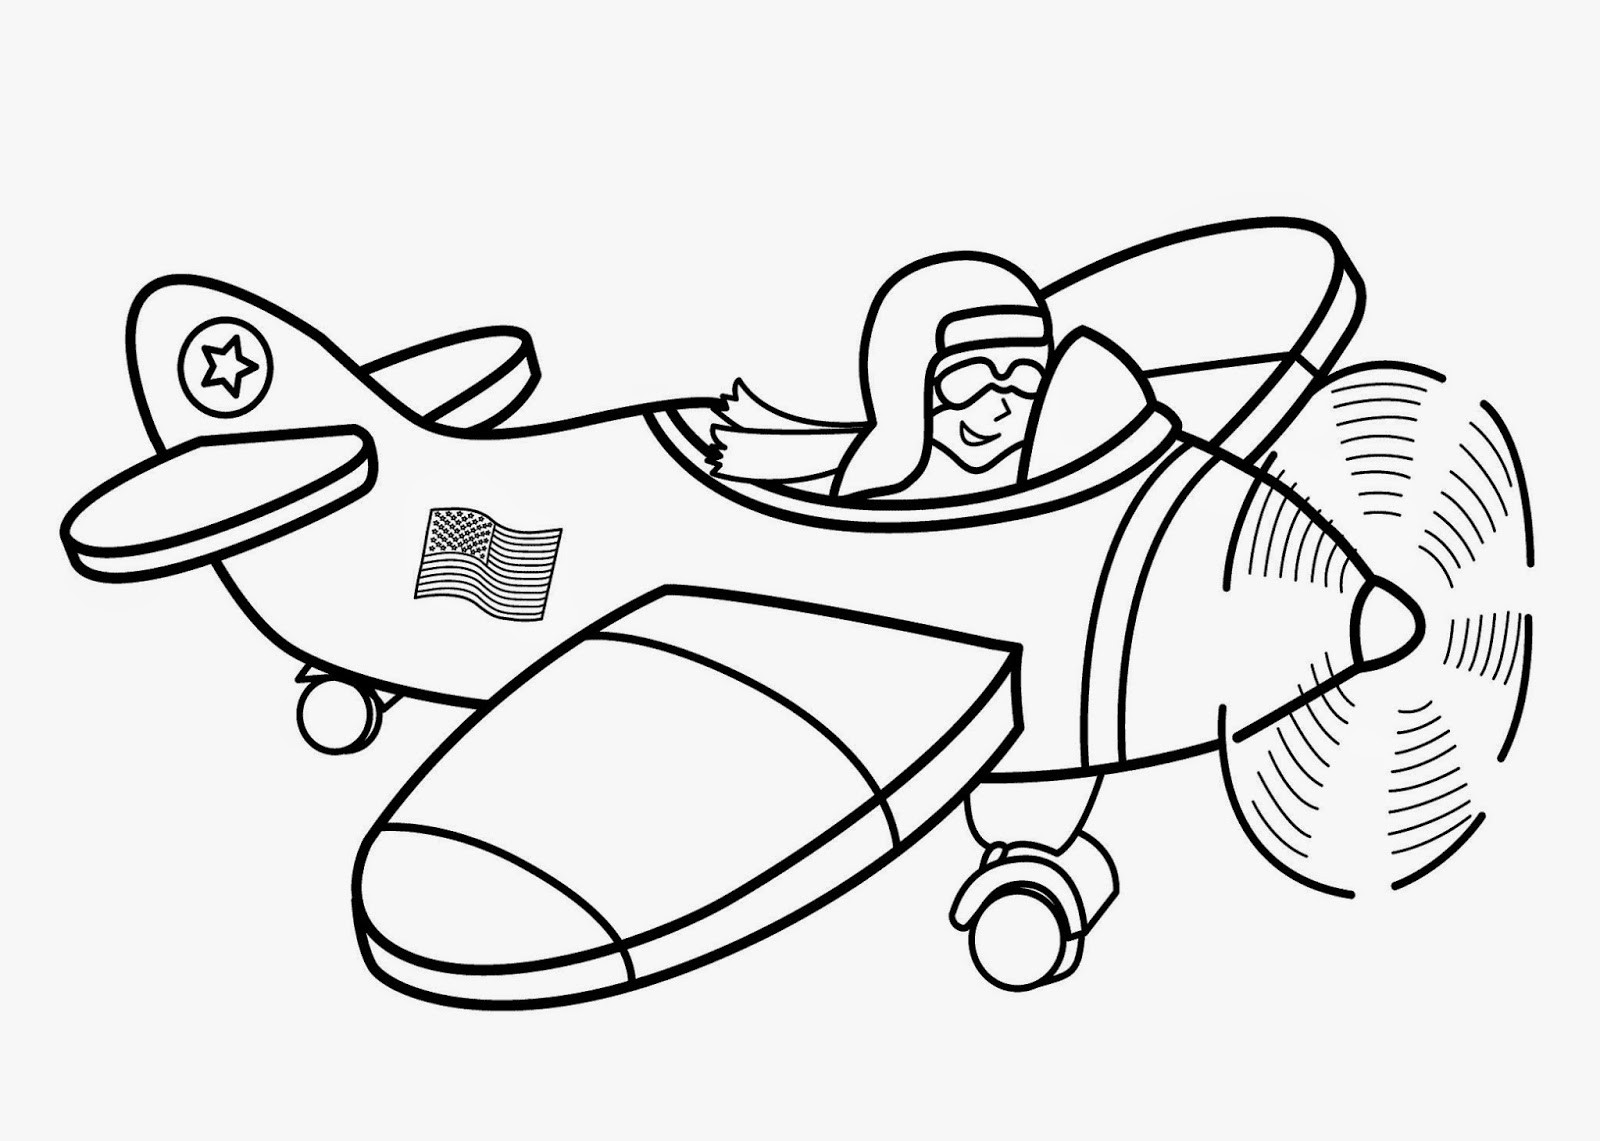 840  Free Printable Coloring Pages Airplane  Latest Free